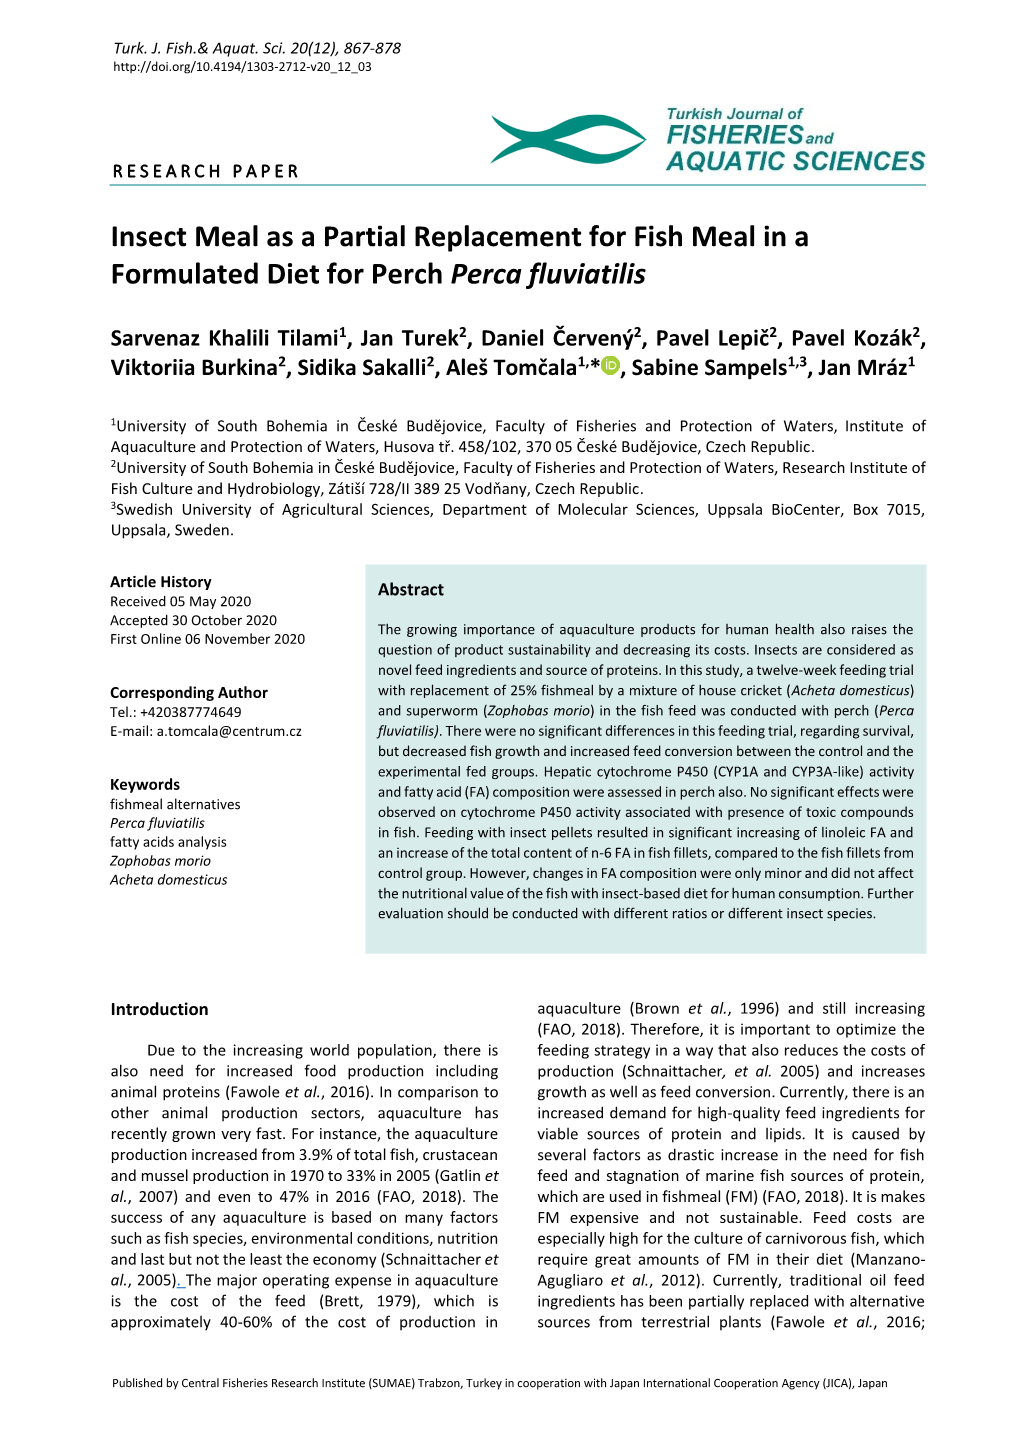 Insect Meal As a Partial Replacement for Fish Meal in a Formulated Diet